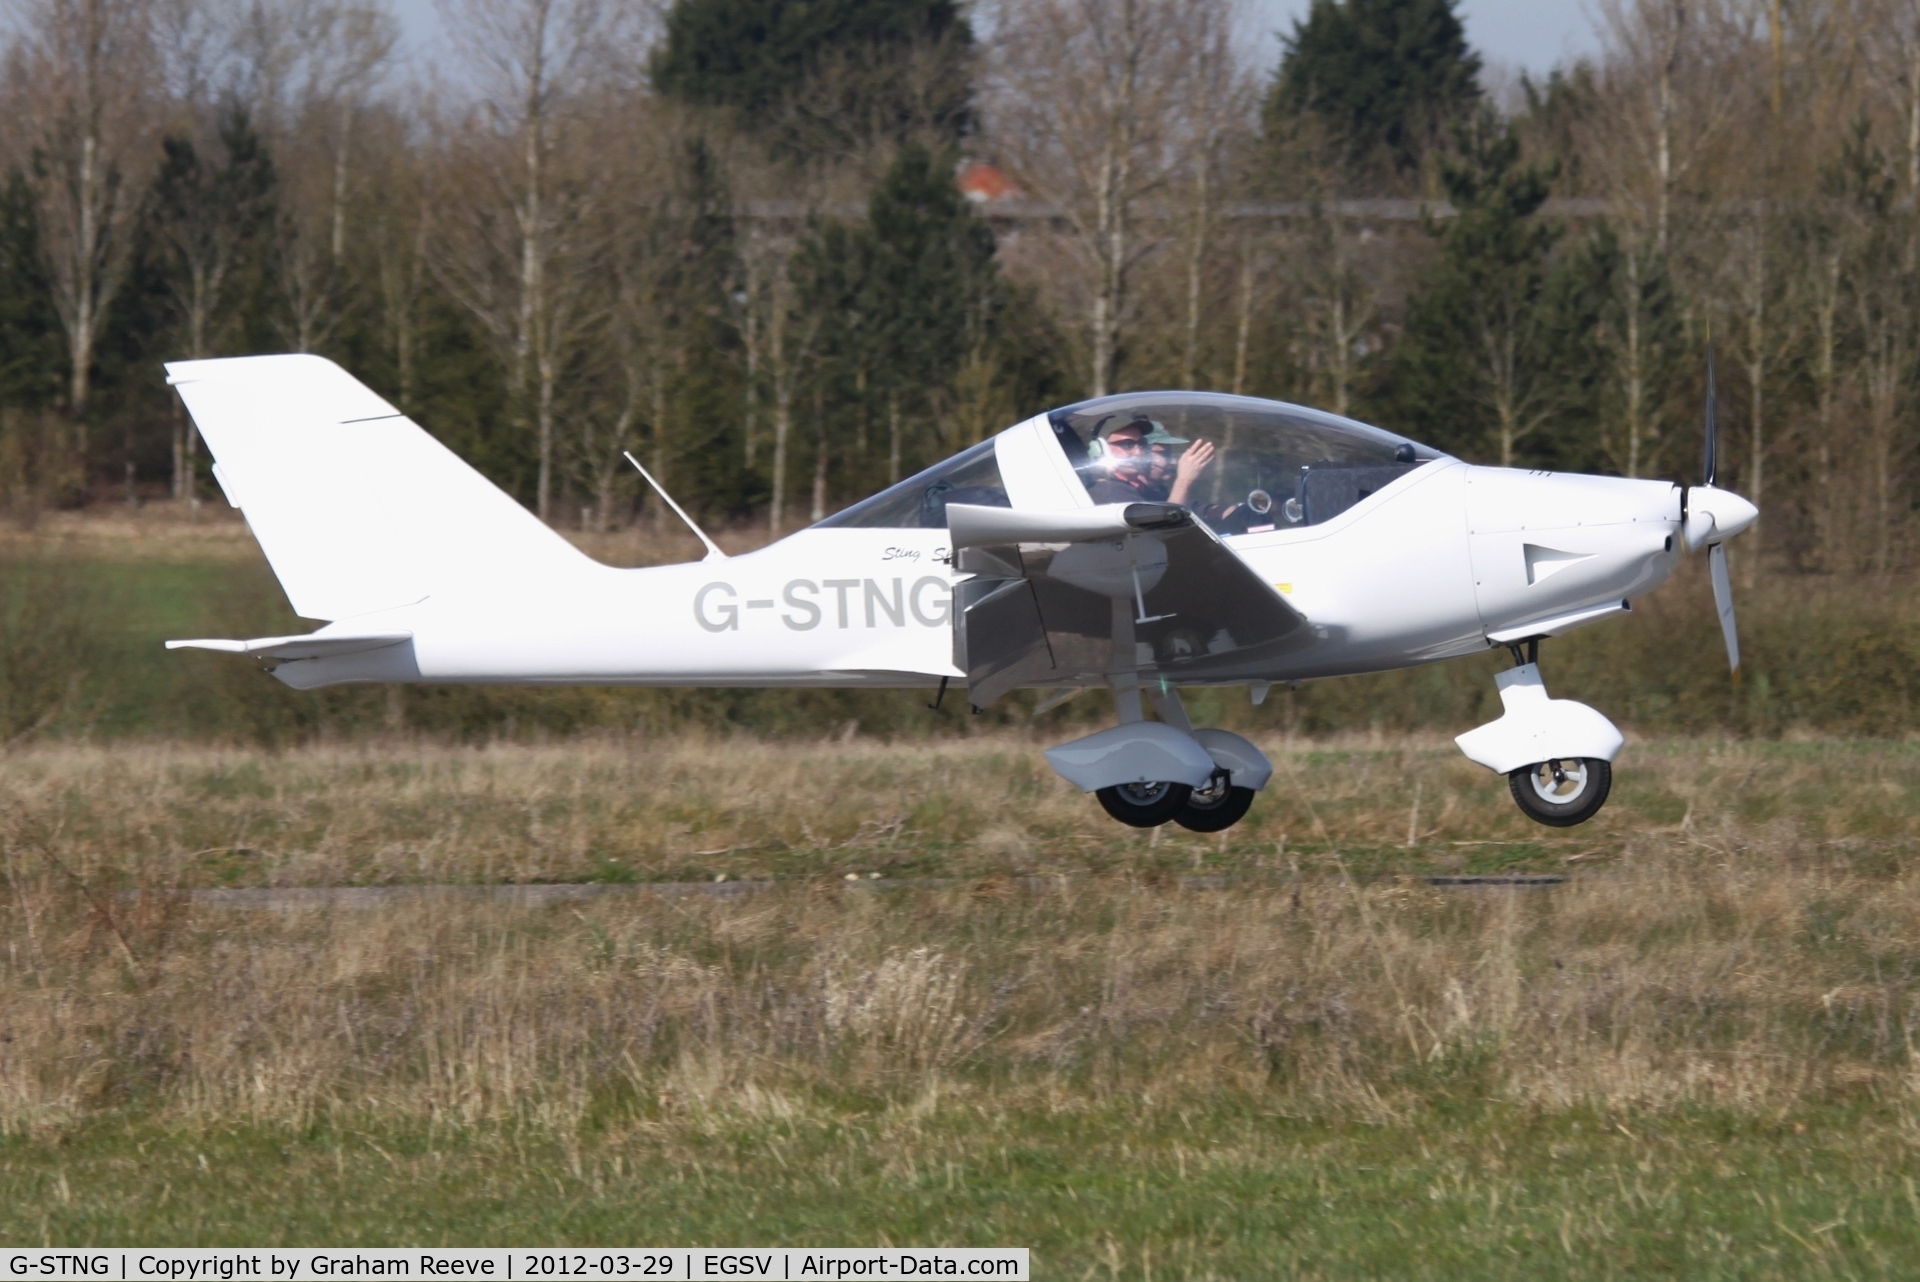 G-STNG, 2011 TL Ultralight TL-2000UK Sting Carbon C/N LAA 347-14789, About to touch down.